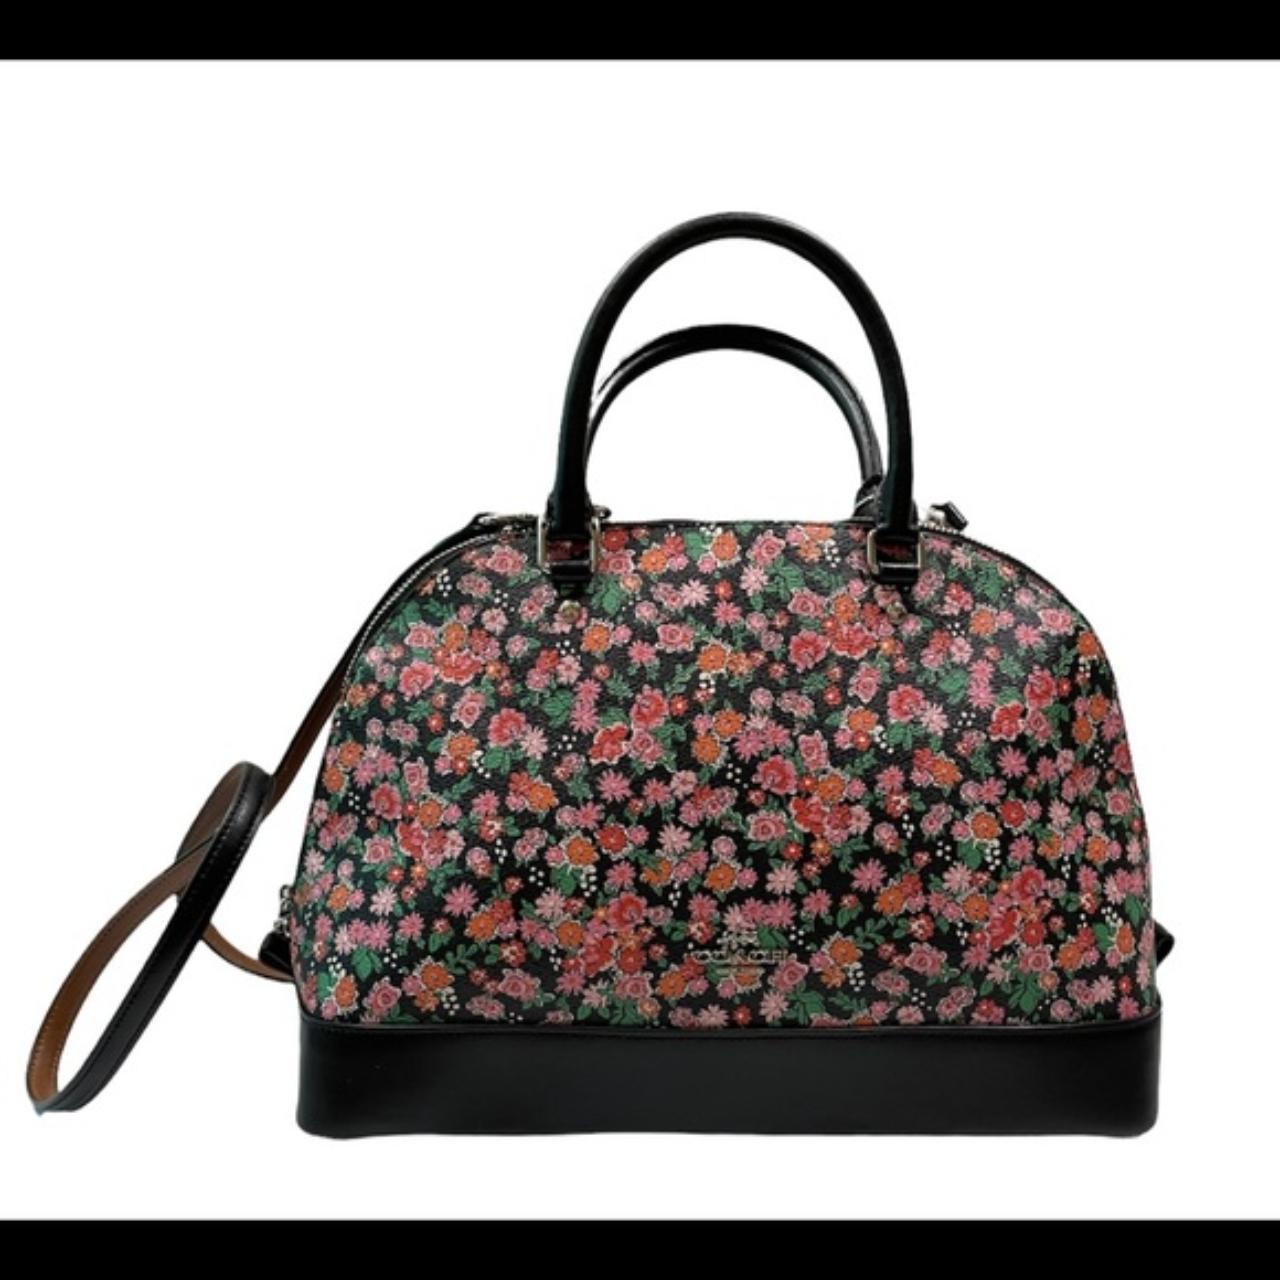 COACH F57621 MINI SIERRA SATCHEL IN POSEY CLUSTER FLORAL PRINT COATED CANVAS